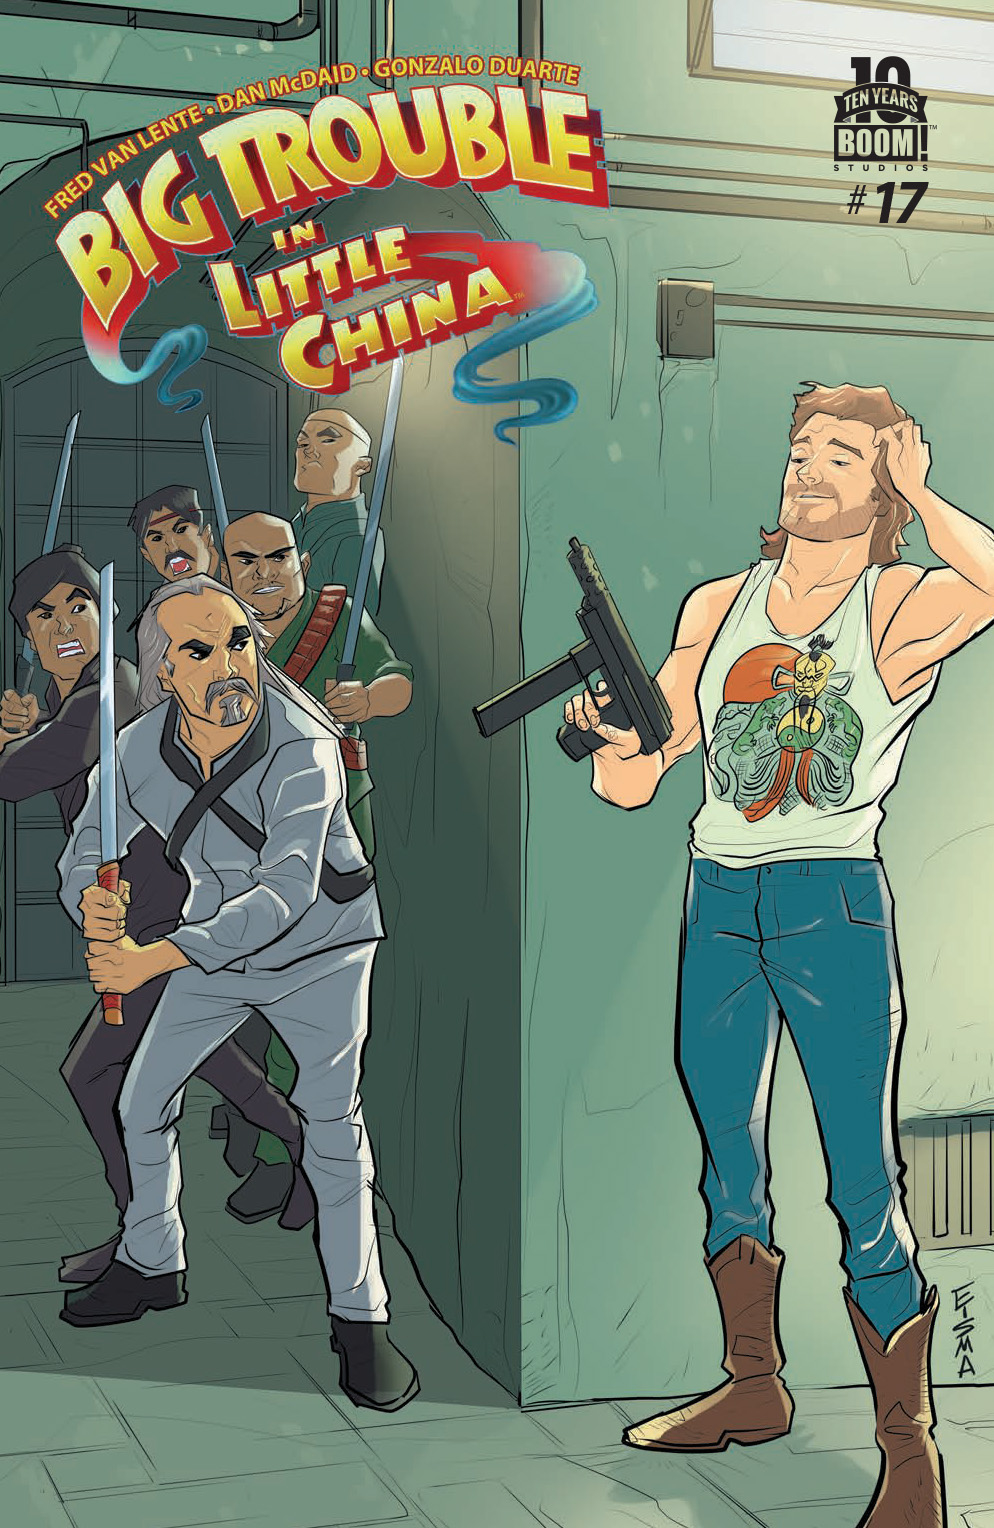 BIG TROUBLE IN LITTLE CHINA #17